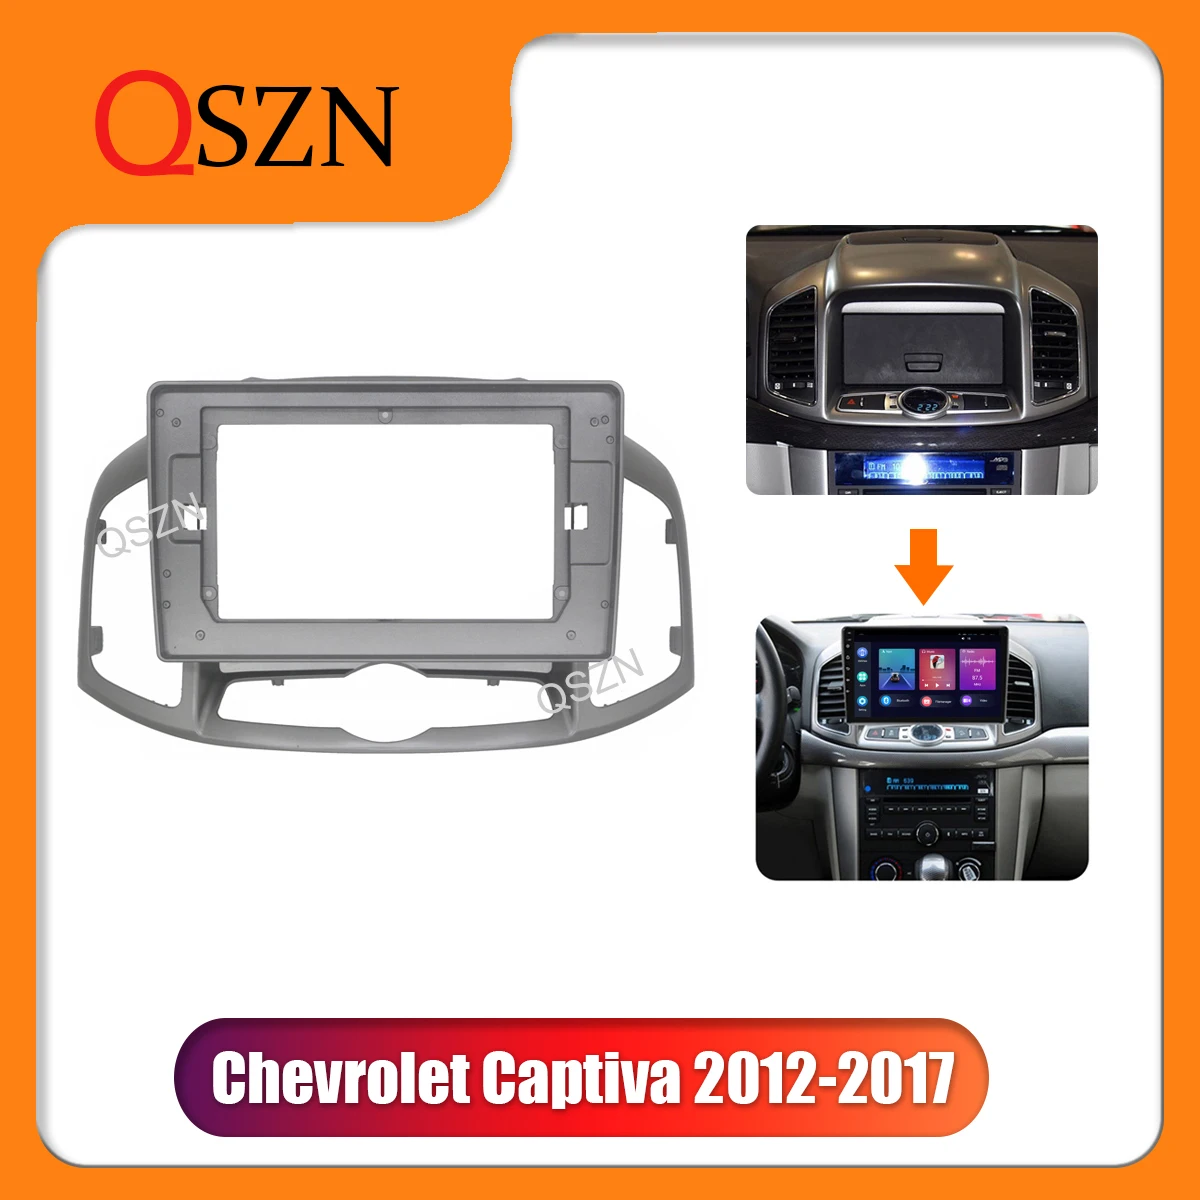 

QSZN 10.1 inch Car Radio Canbus Cable Frame Fascia For Chevrolet Captiva 2012-2017 Dashboard Mount Kit Fitting Adaptor 2 Din